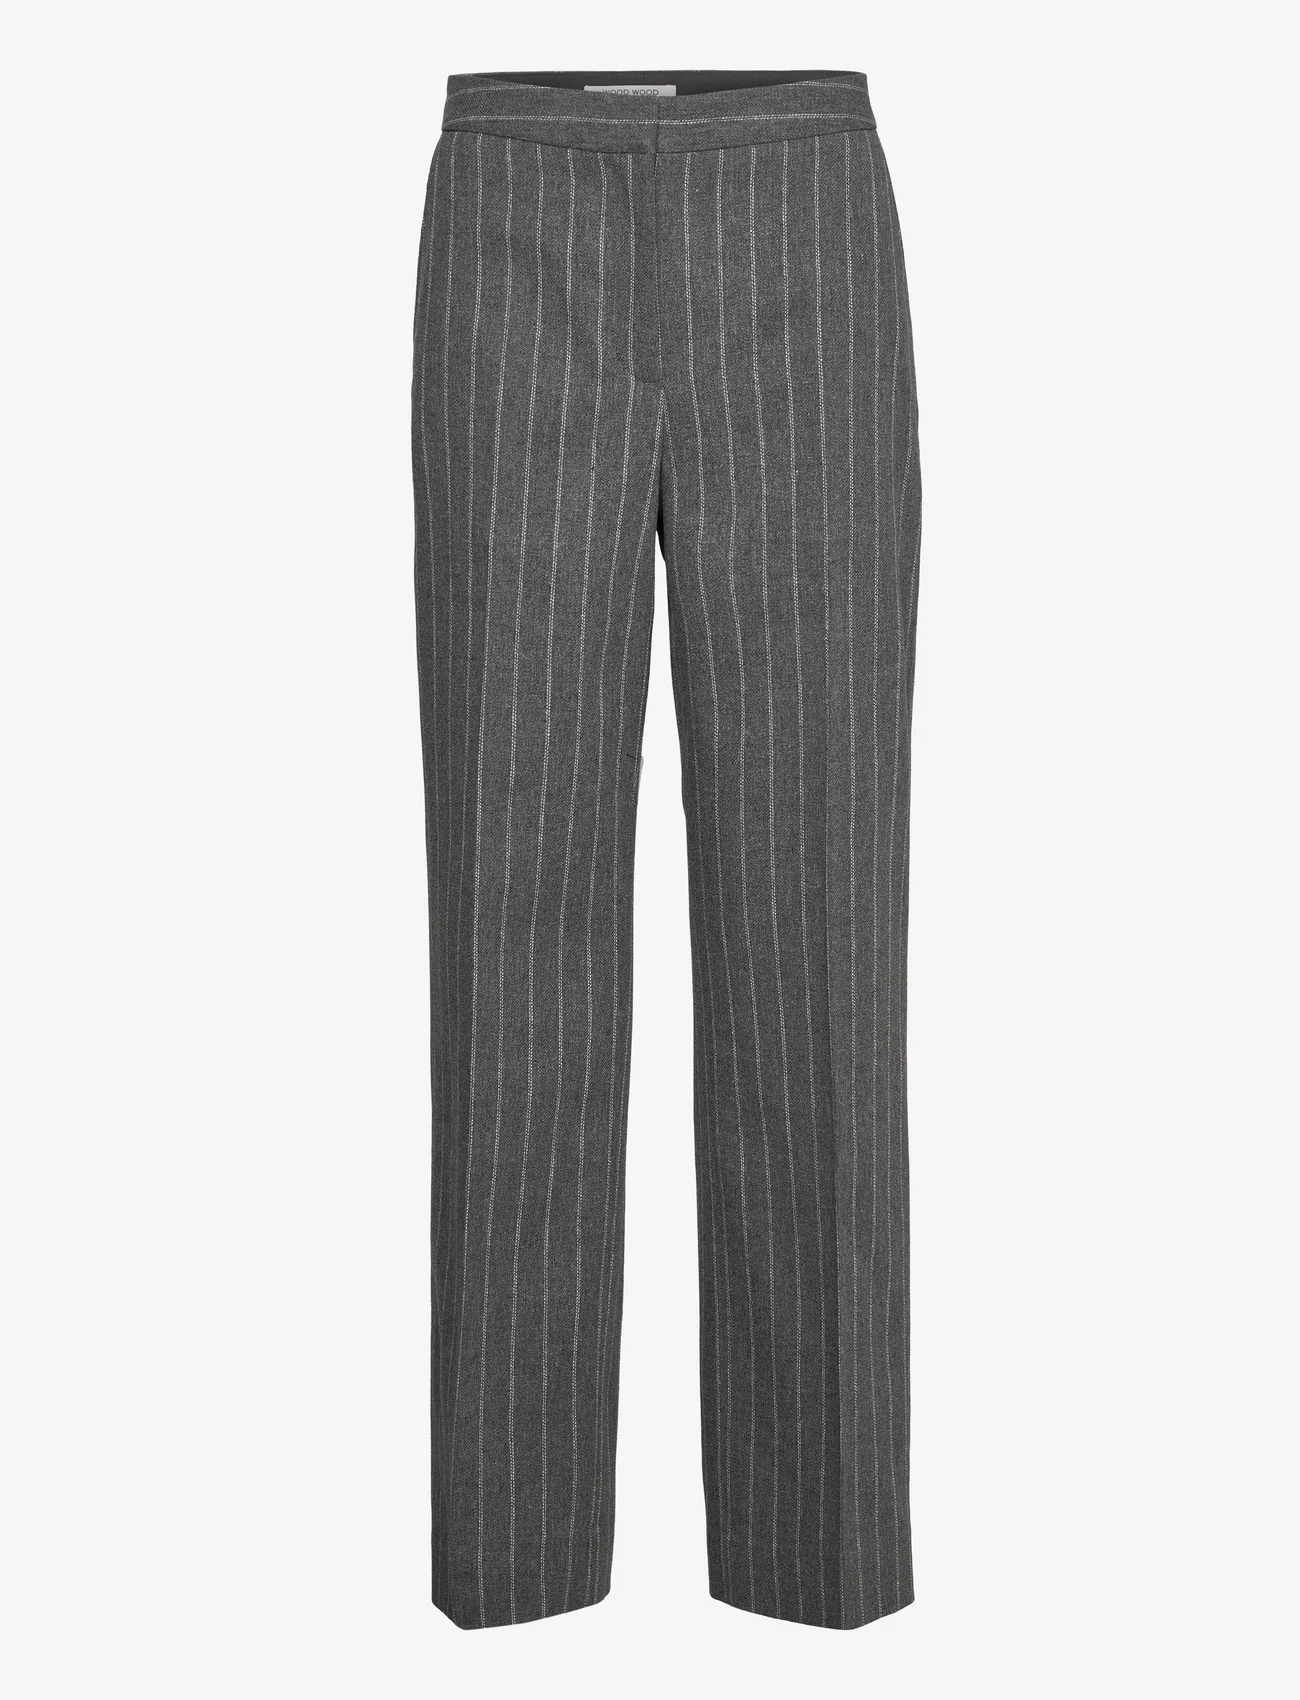 Wood Wood - Willow wool trousers - rette bukser - charcoal - 0